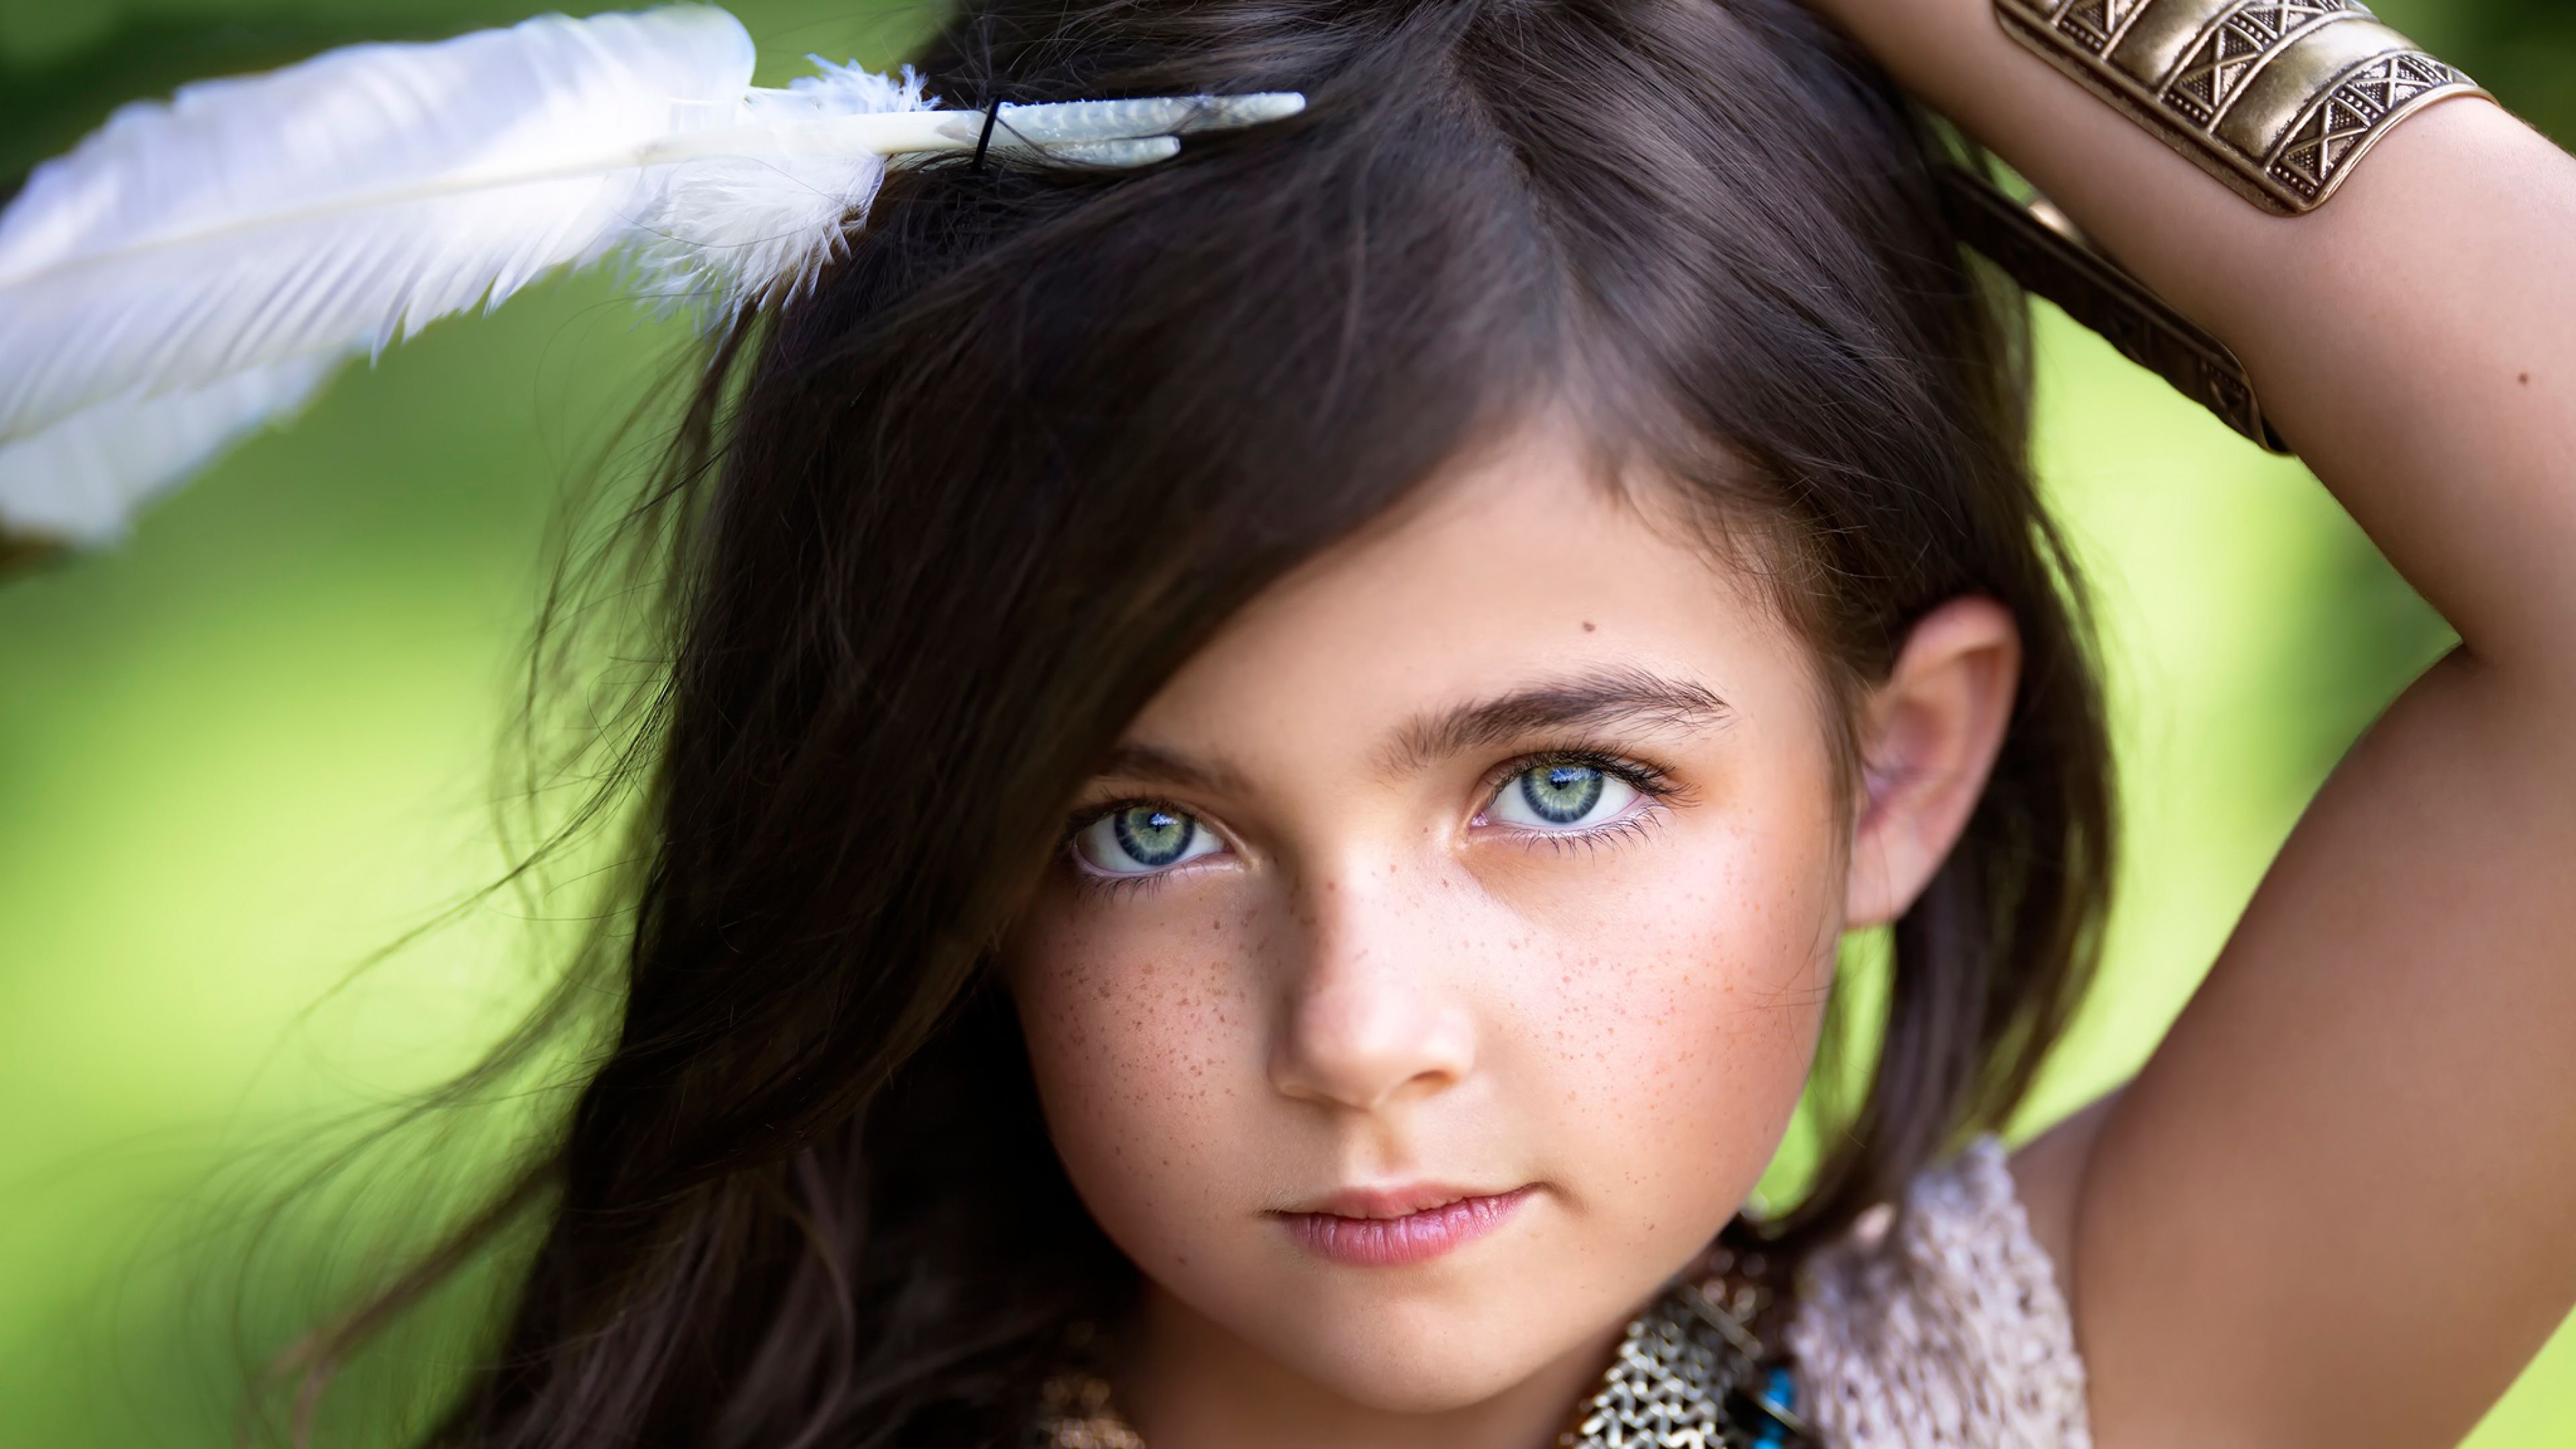 Little beautiful girl with a white feather in her hair Desktop wallpaper 2560x1600